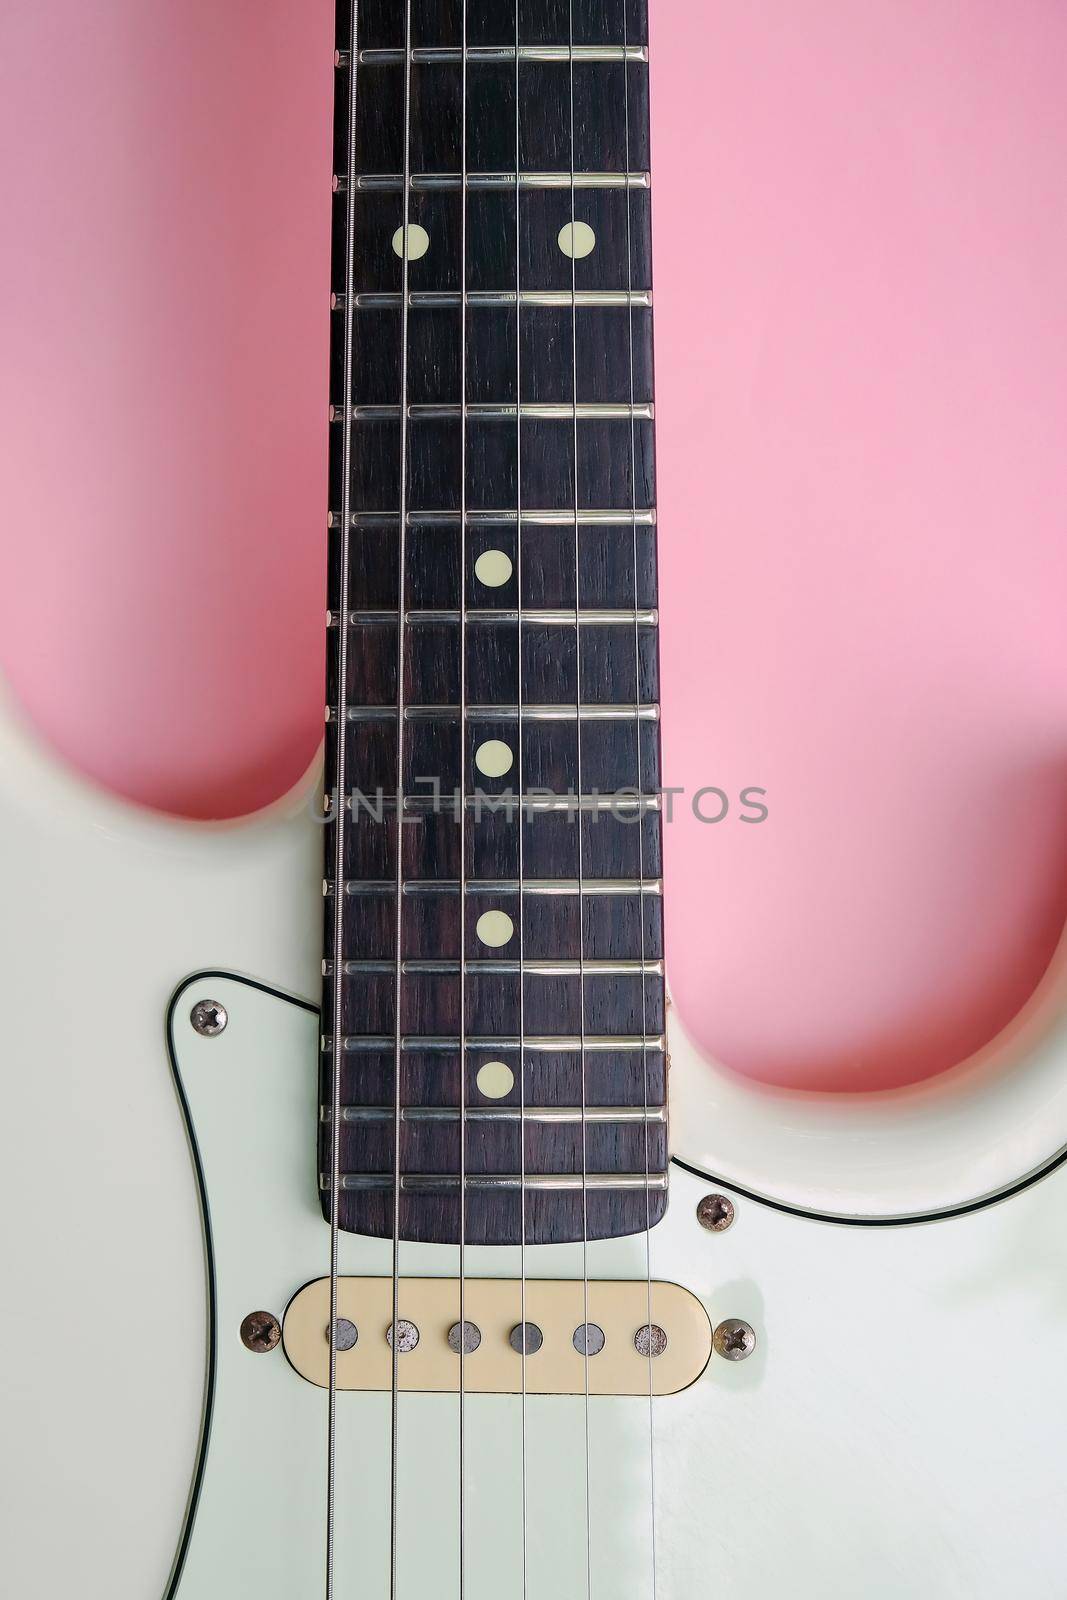 White Electric Guitar by ponsulak